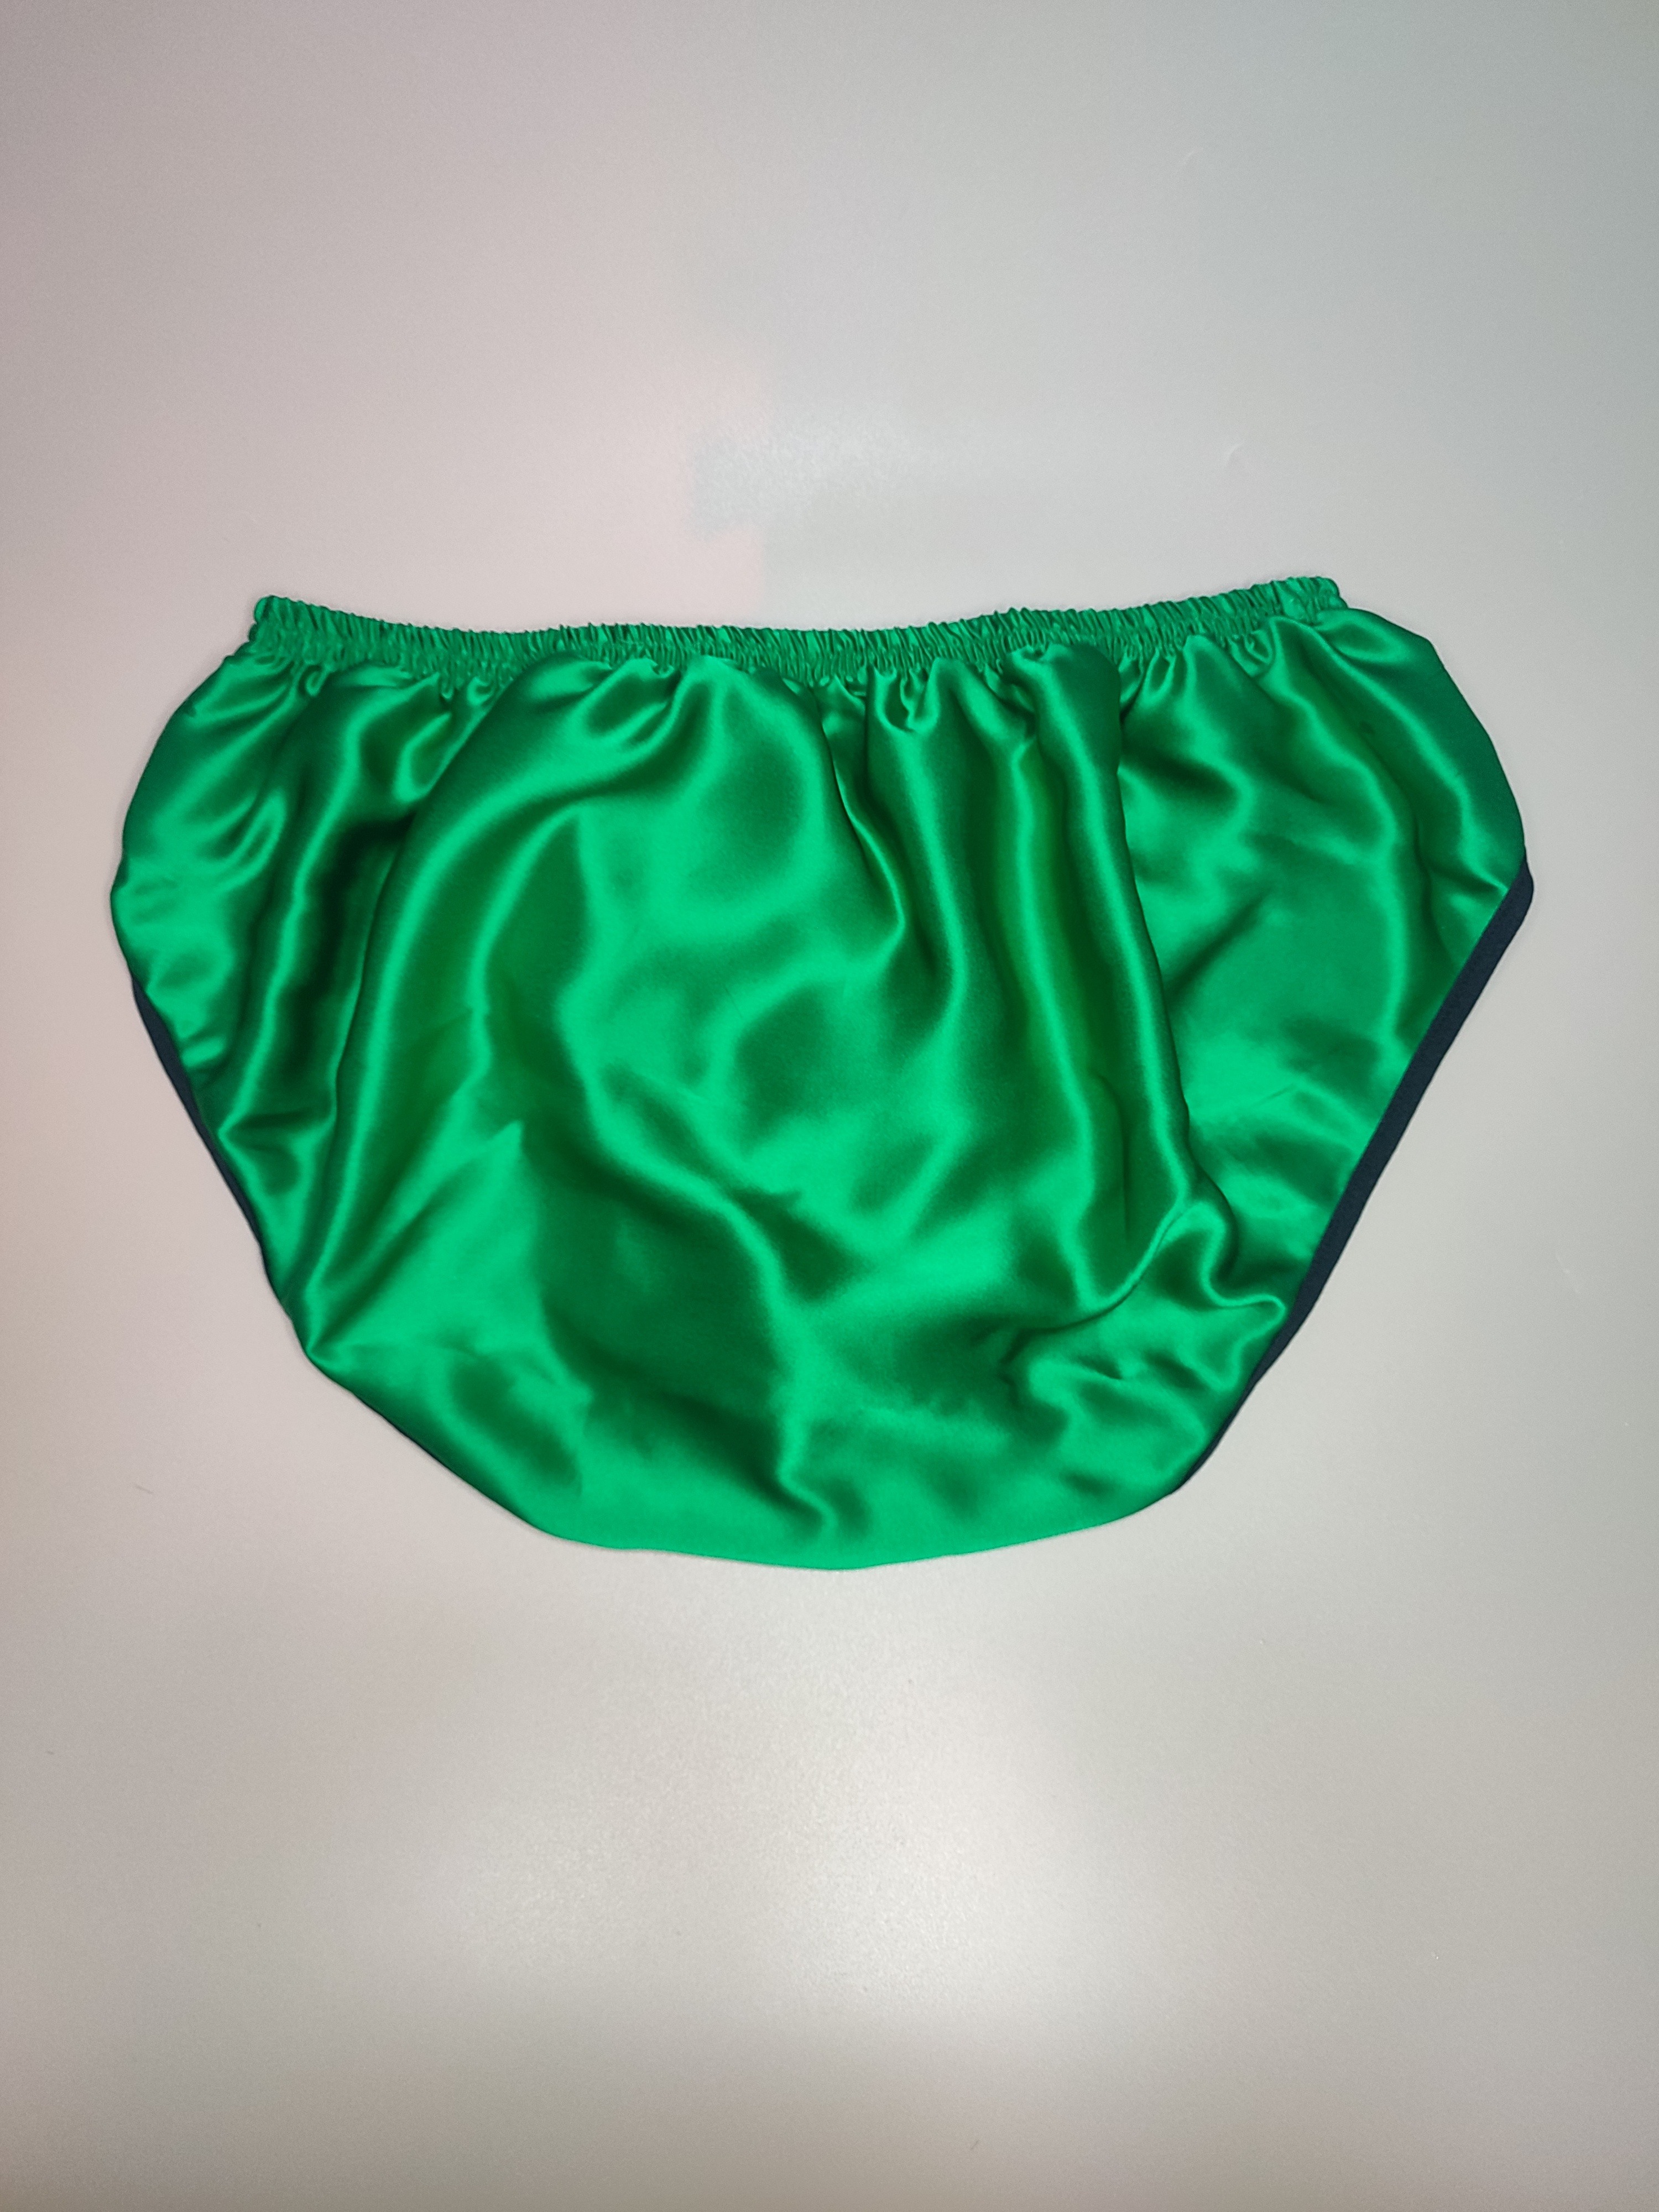 Turquoise Pure Silk French Cut Panties, High Waist